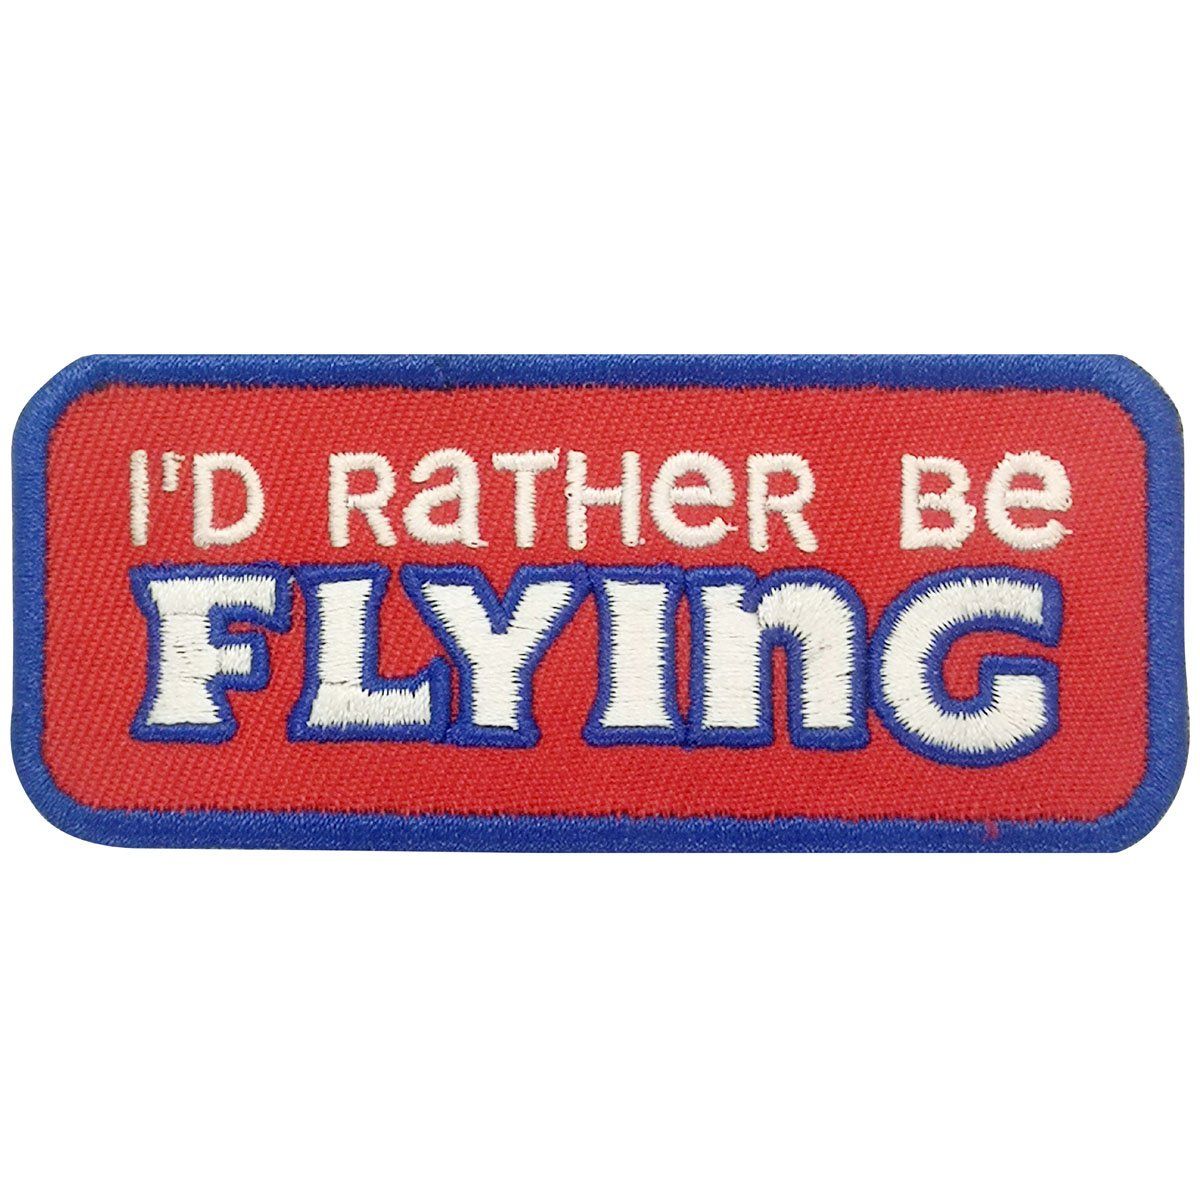 I'd Rather Be Flying Embroidered Patch (Iron On Application) - PilotMall.com